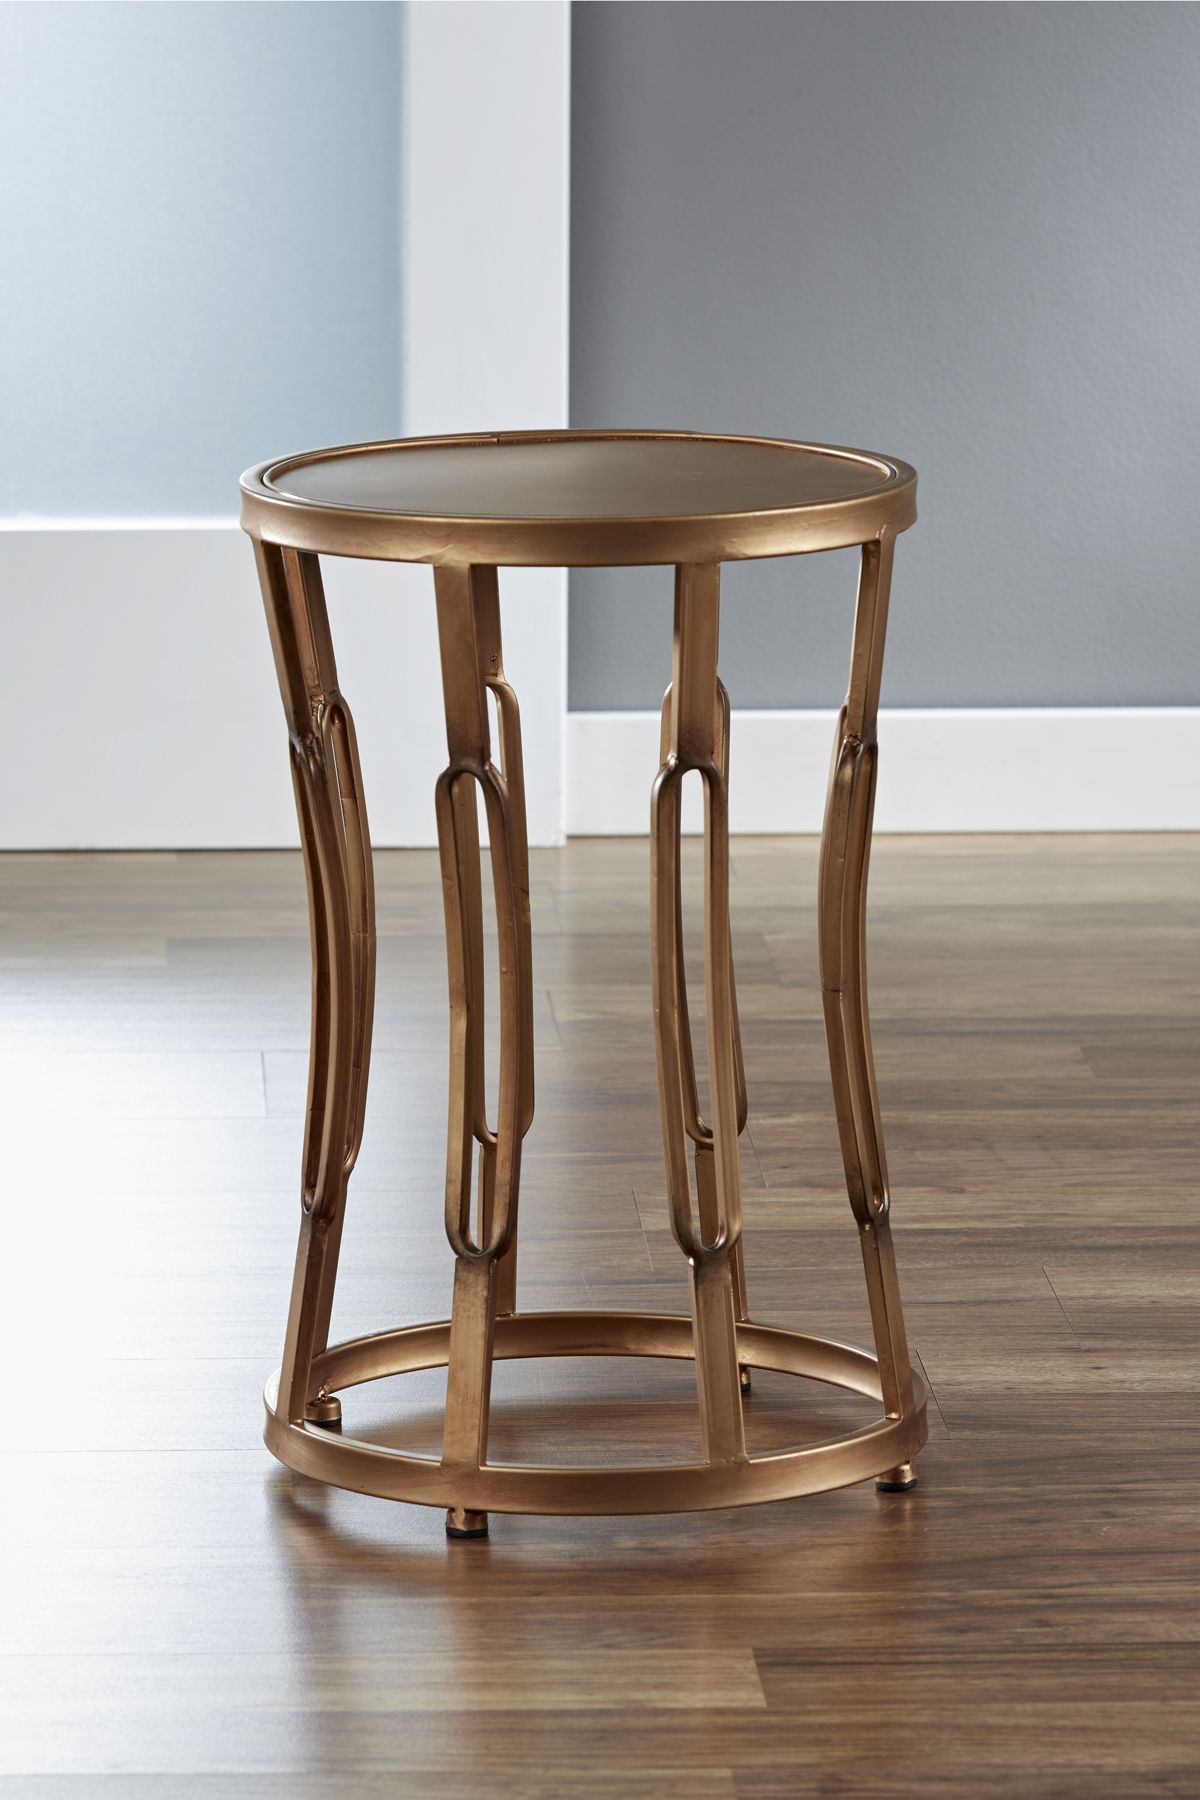 innerspace hourglass table occasional tables accent threshold simplicity and strength form combine this sleek contemporary end complete with antique copper finish accents airy